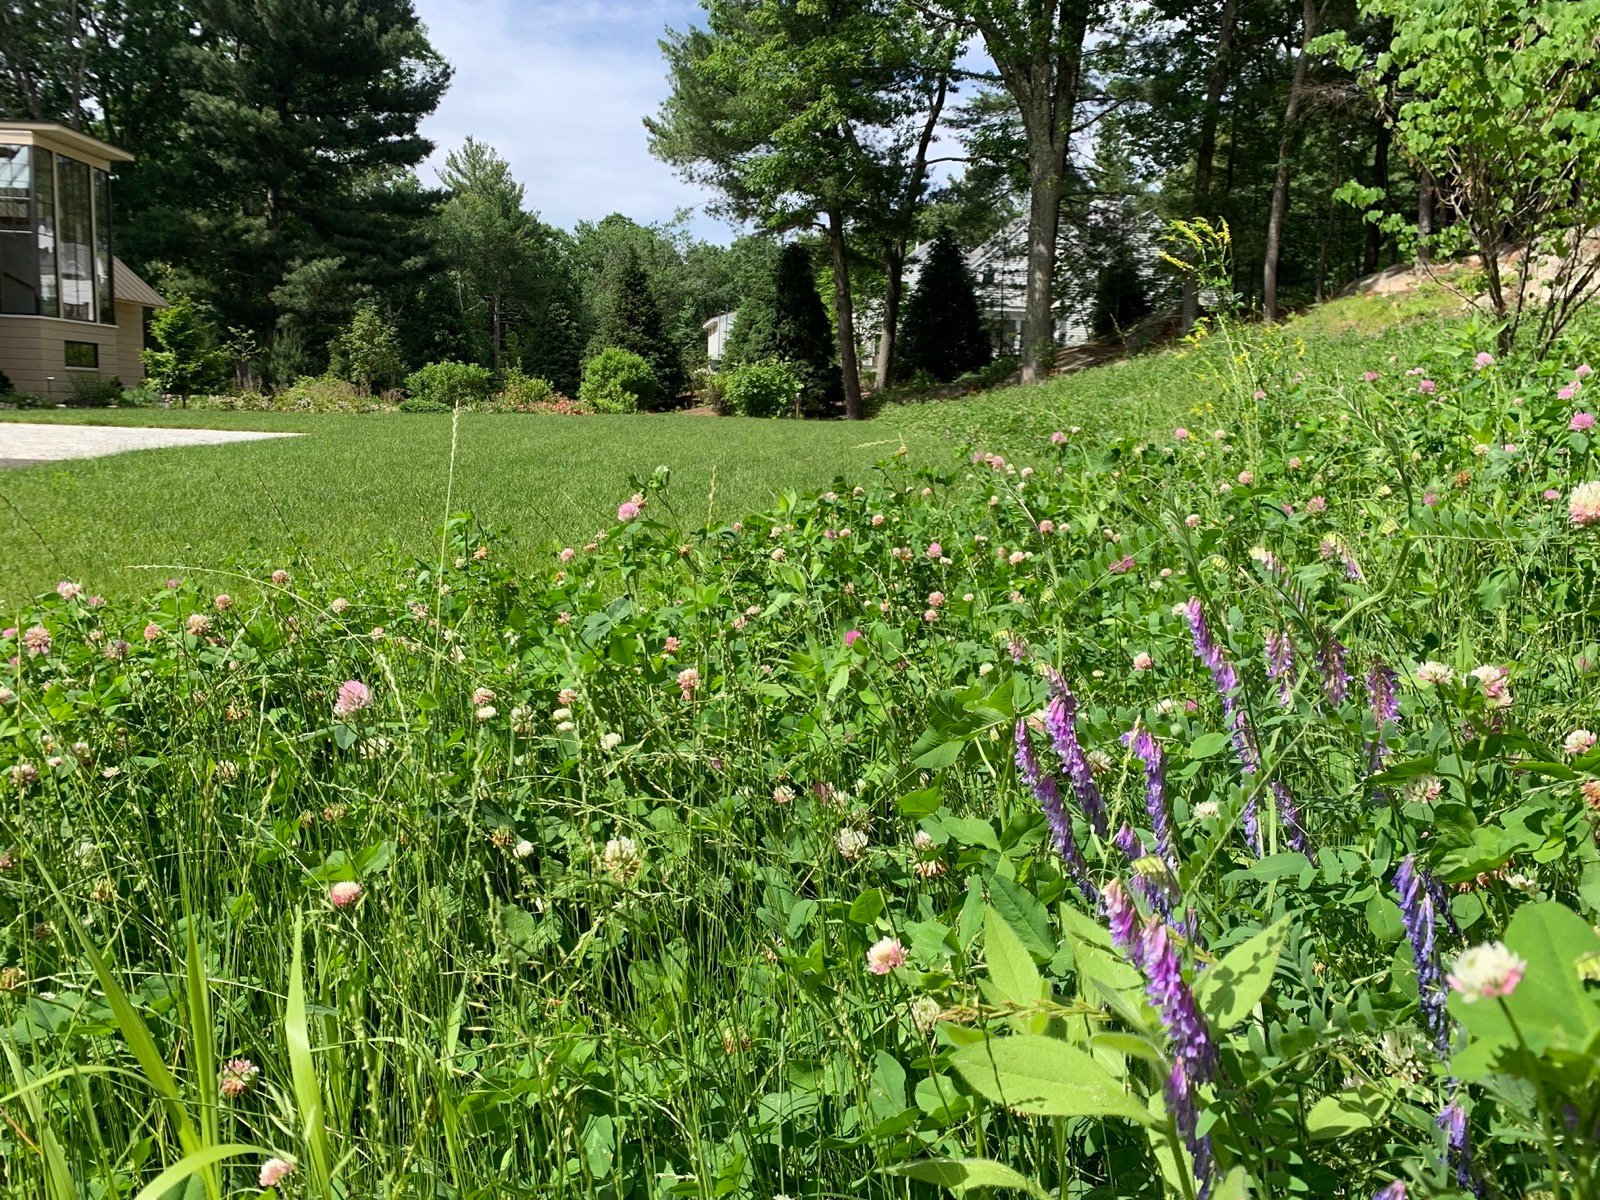 Mix-Match-cant-give-up-the-whole-lawn-consider-half-turf-half-mixed-clover and-vetch